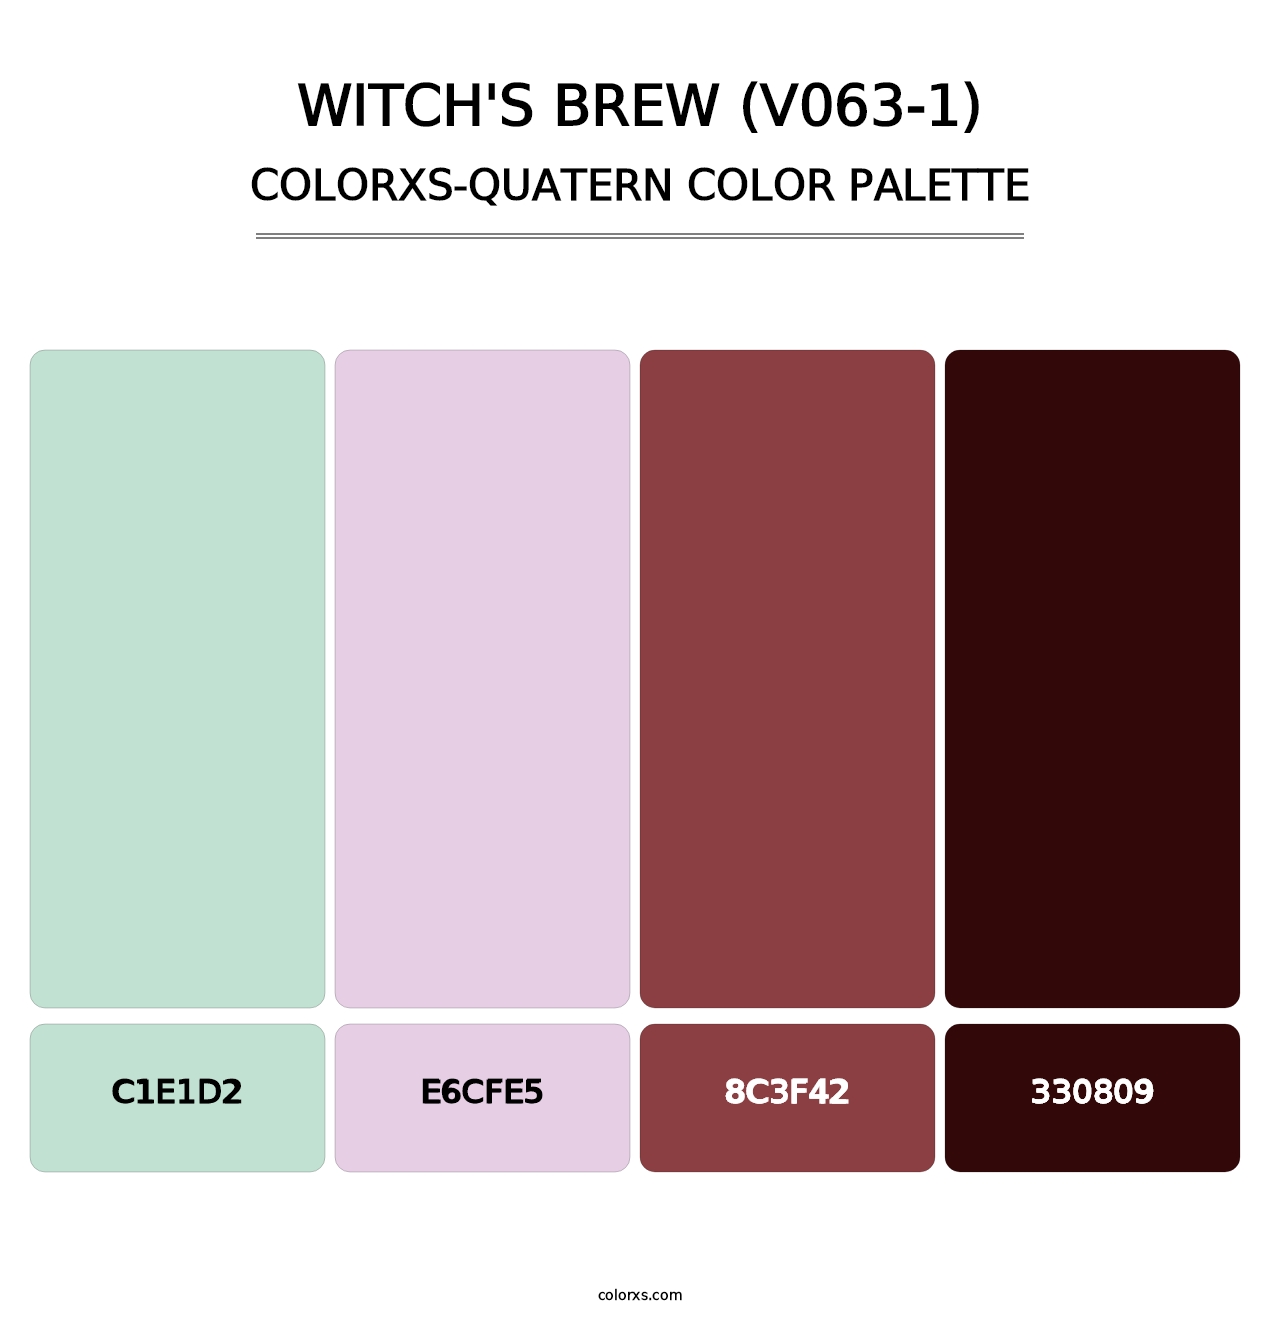 Witch's Brew (V063-1) - Colorxs Quatern Palette